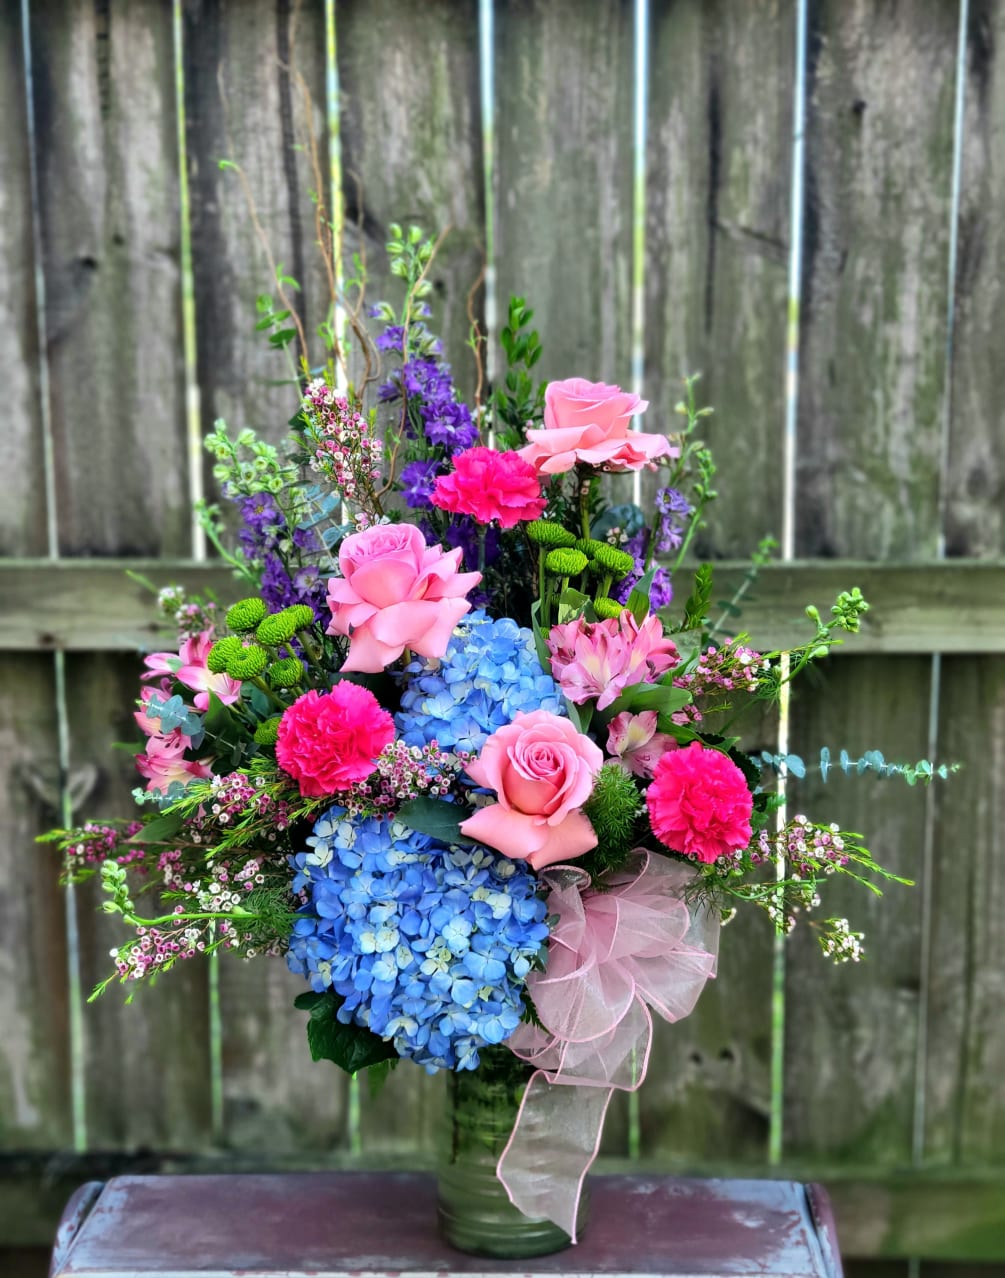 This gem of a bouquet brings the beauty and tranquility of a